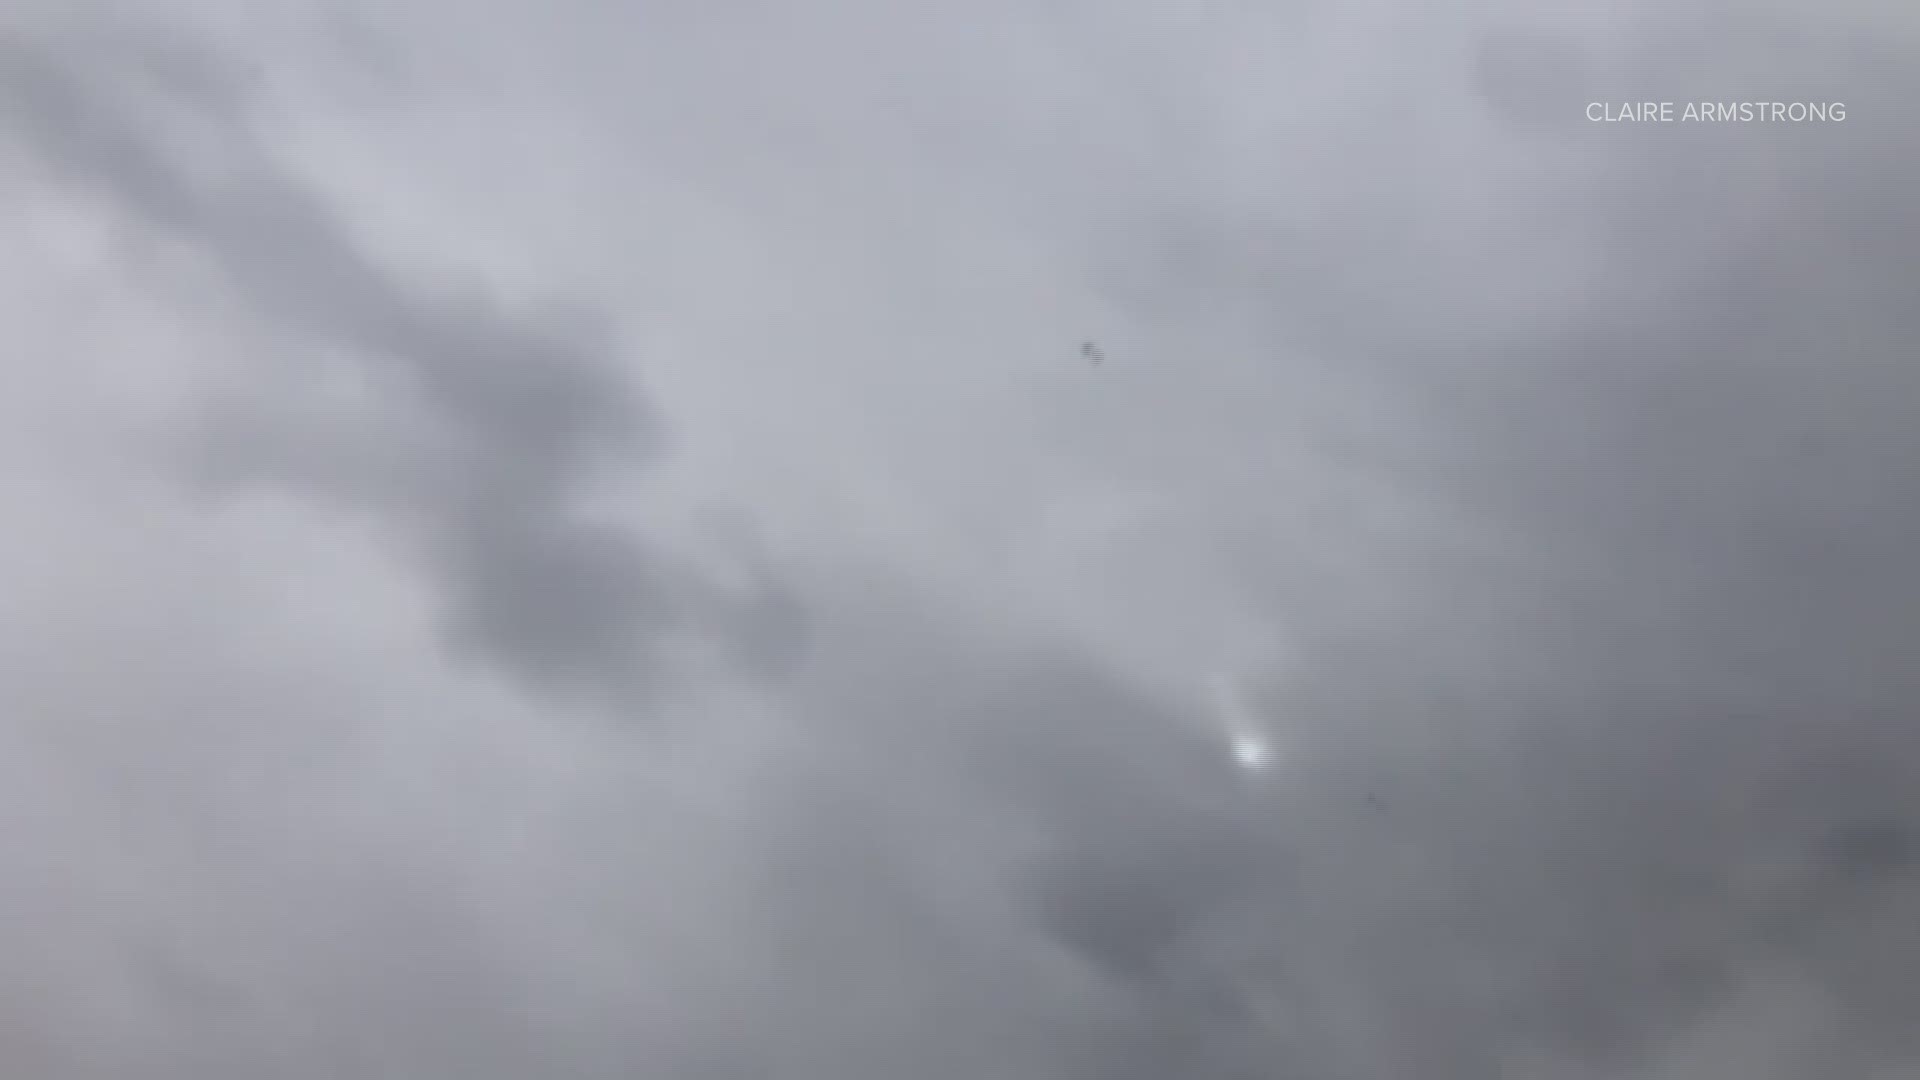 Neighborhoods in Broomfield were hit by airplane debris falling from the sky on Saturday afternoon. (Editor's note: Video contains profanity)